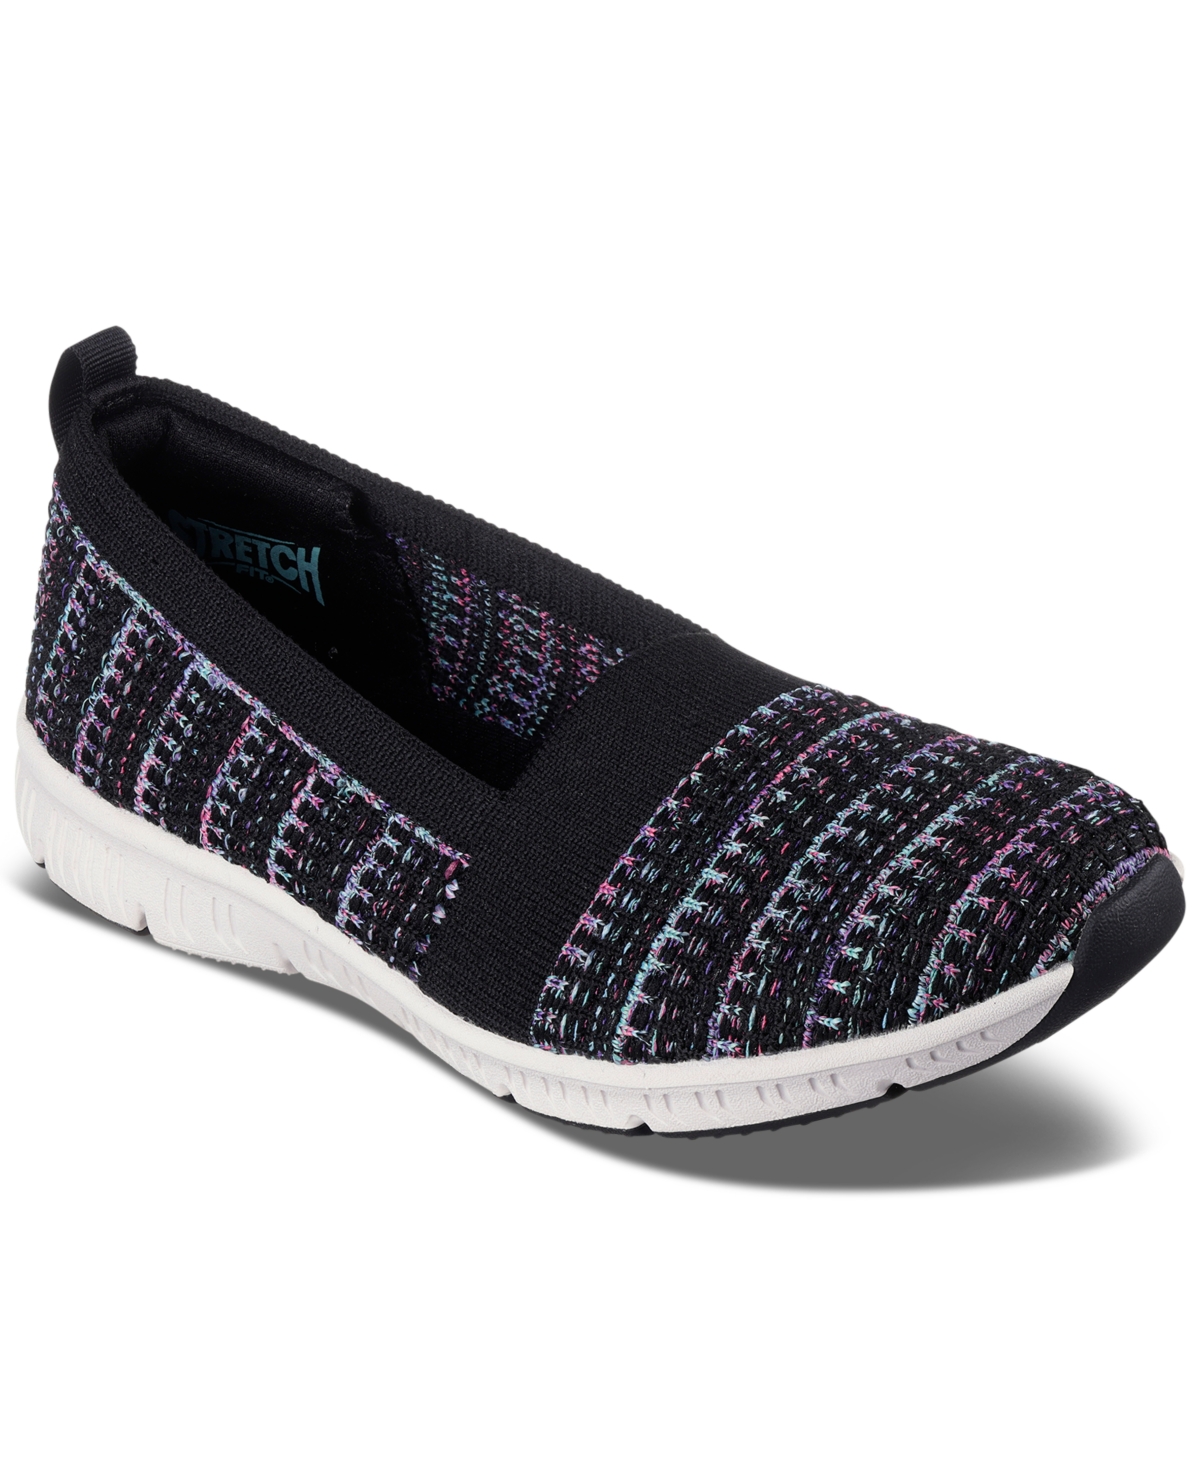 Women's Be Cool - Sherbet Skies Casual Sneakers from Finish Line - Black, Multi